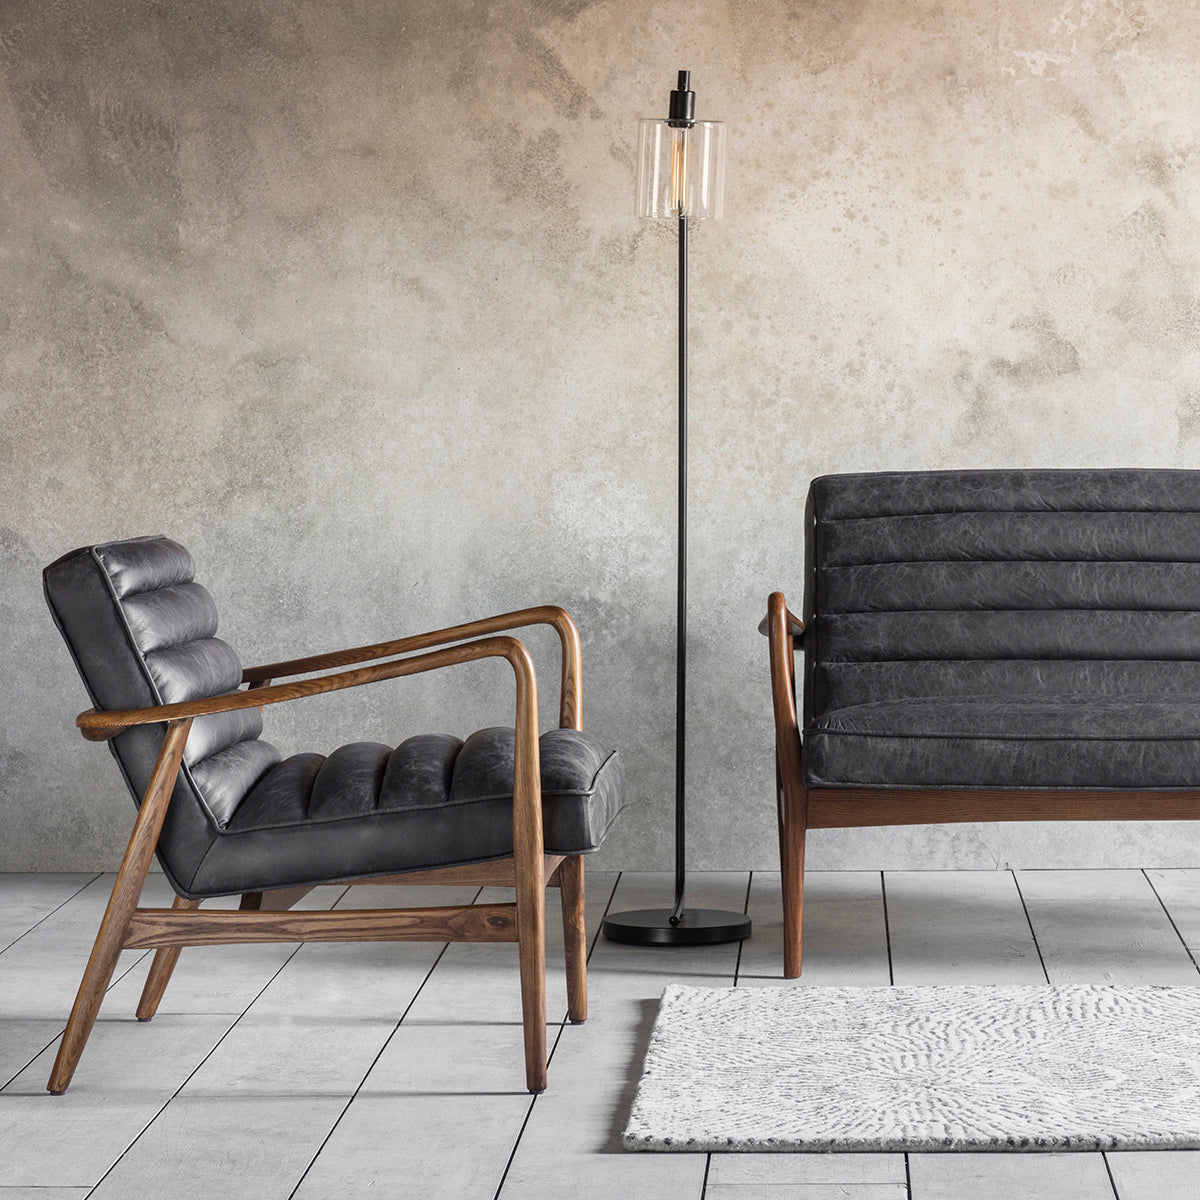 A pair of antique ebony chairs and a lamp on a concrete floor, part of Kikiathome.co.uk's interior decor collection.